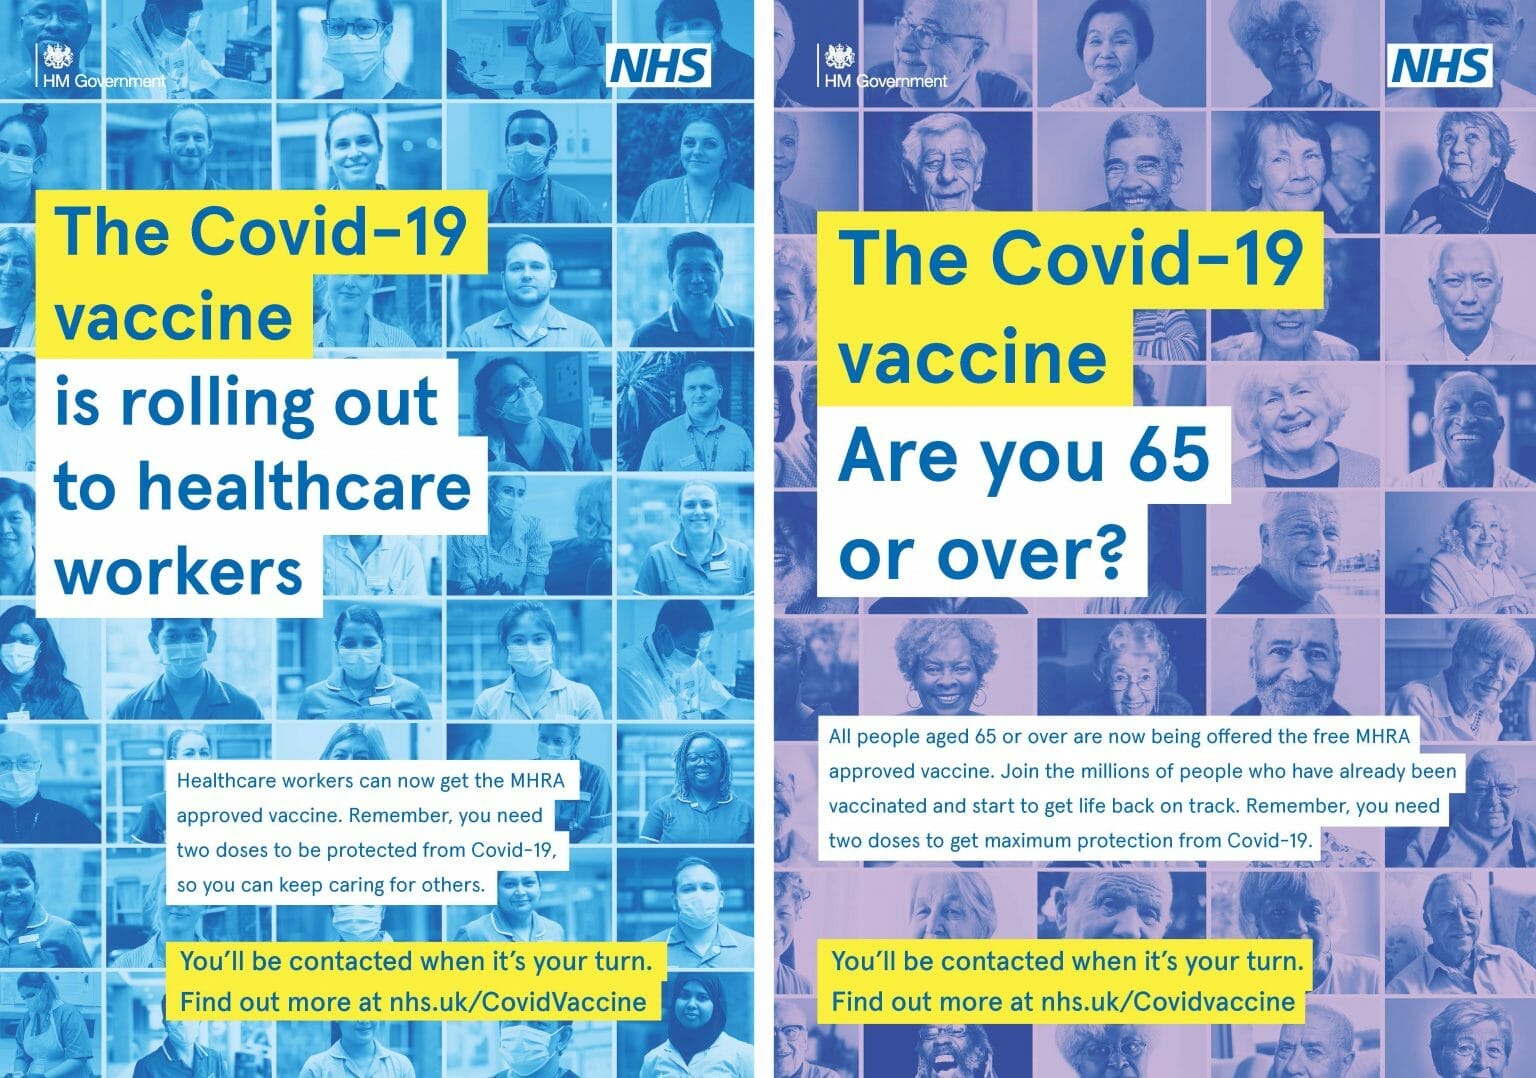 NHS COVID-19 posters from Public Health England about the vaccine